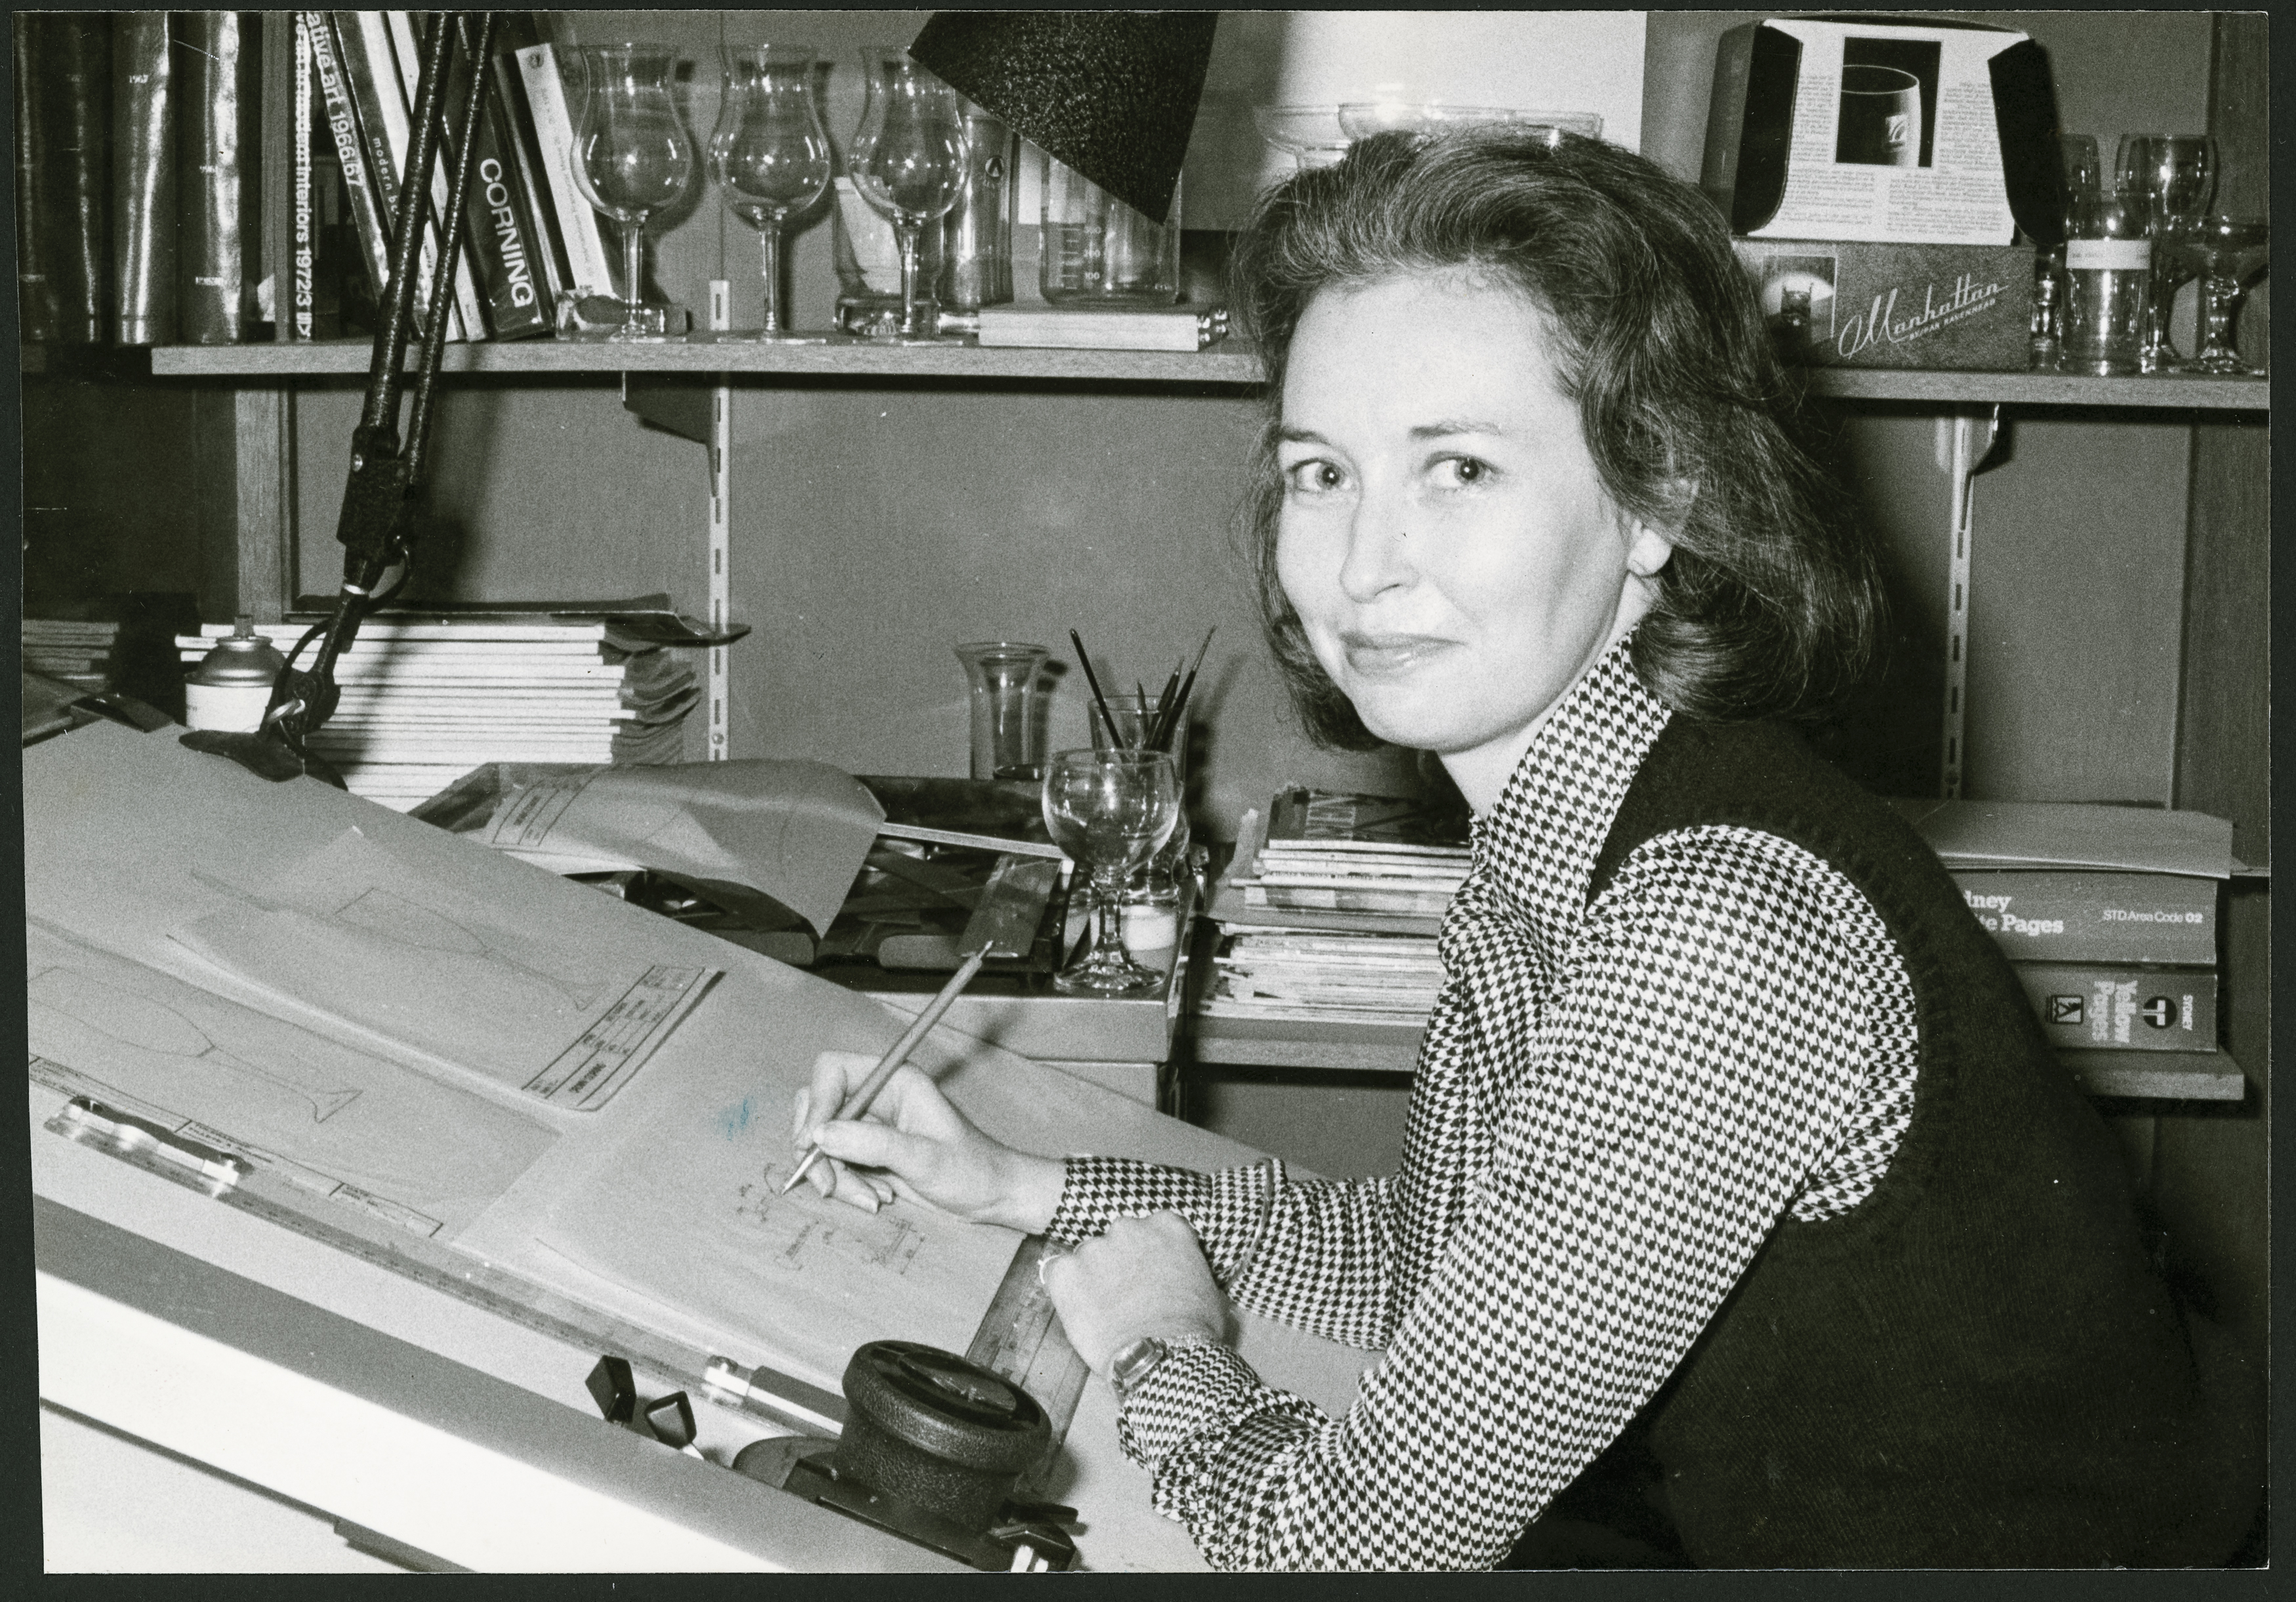 Black and white photograph of a woman working at a drawing board.